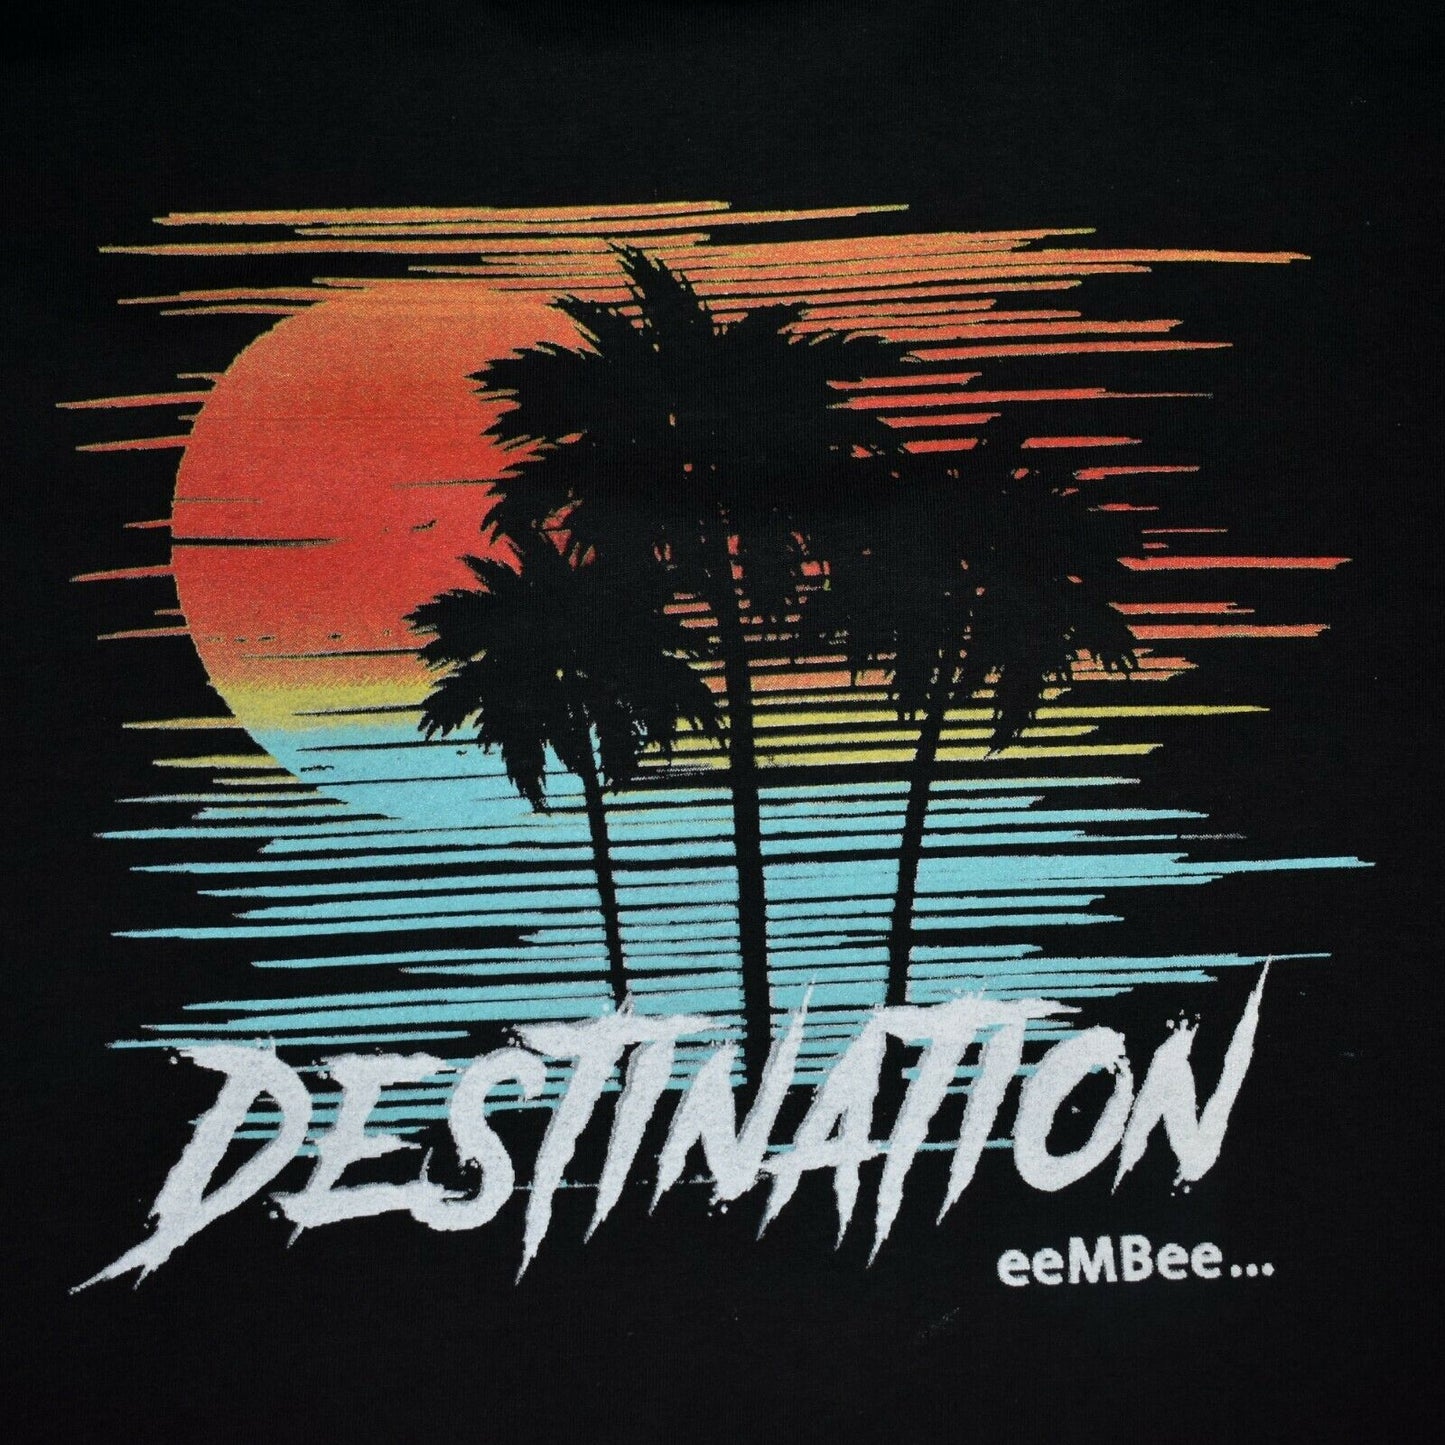 Men's T-Shirt Sunset Bahama Palm Trees Destination by eeMBee